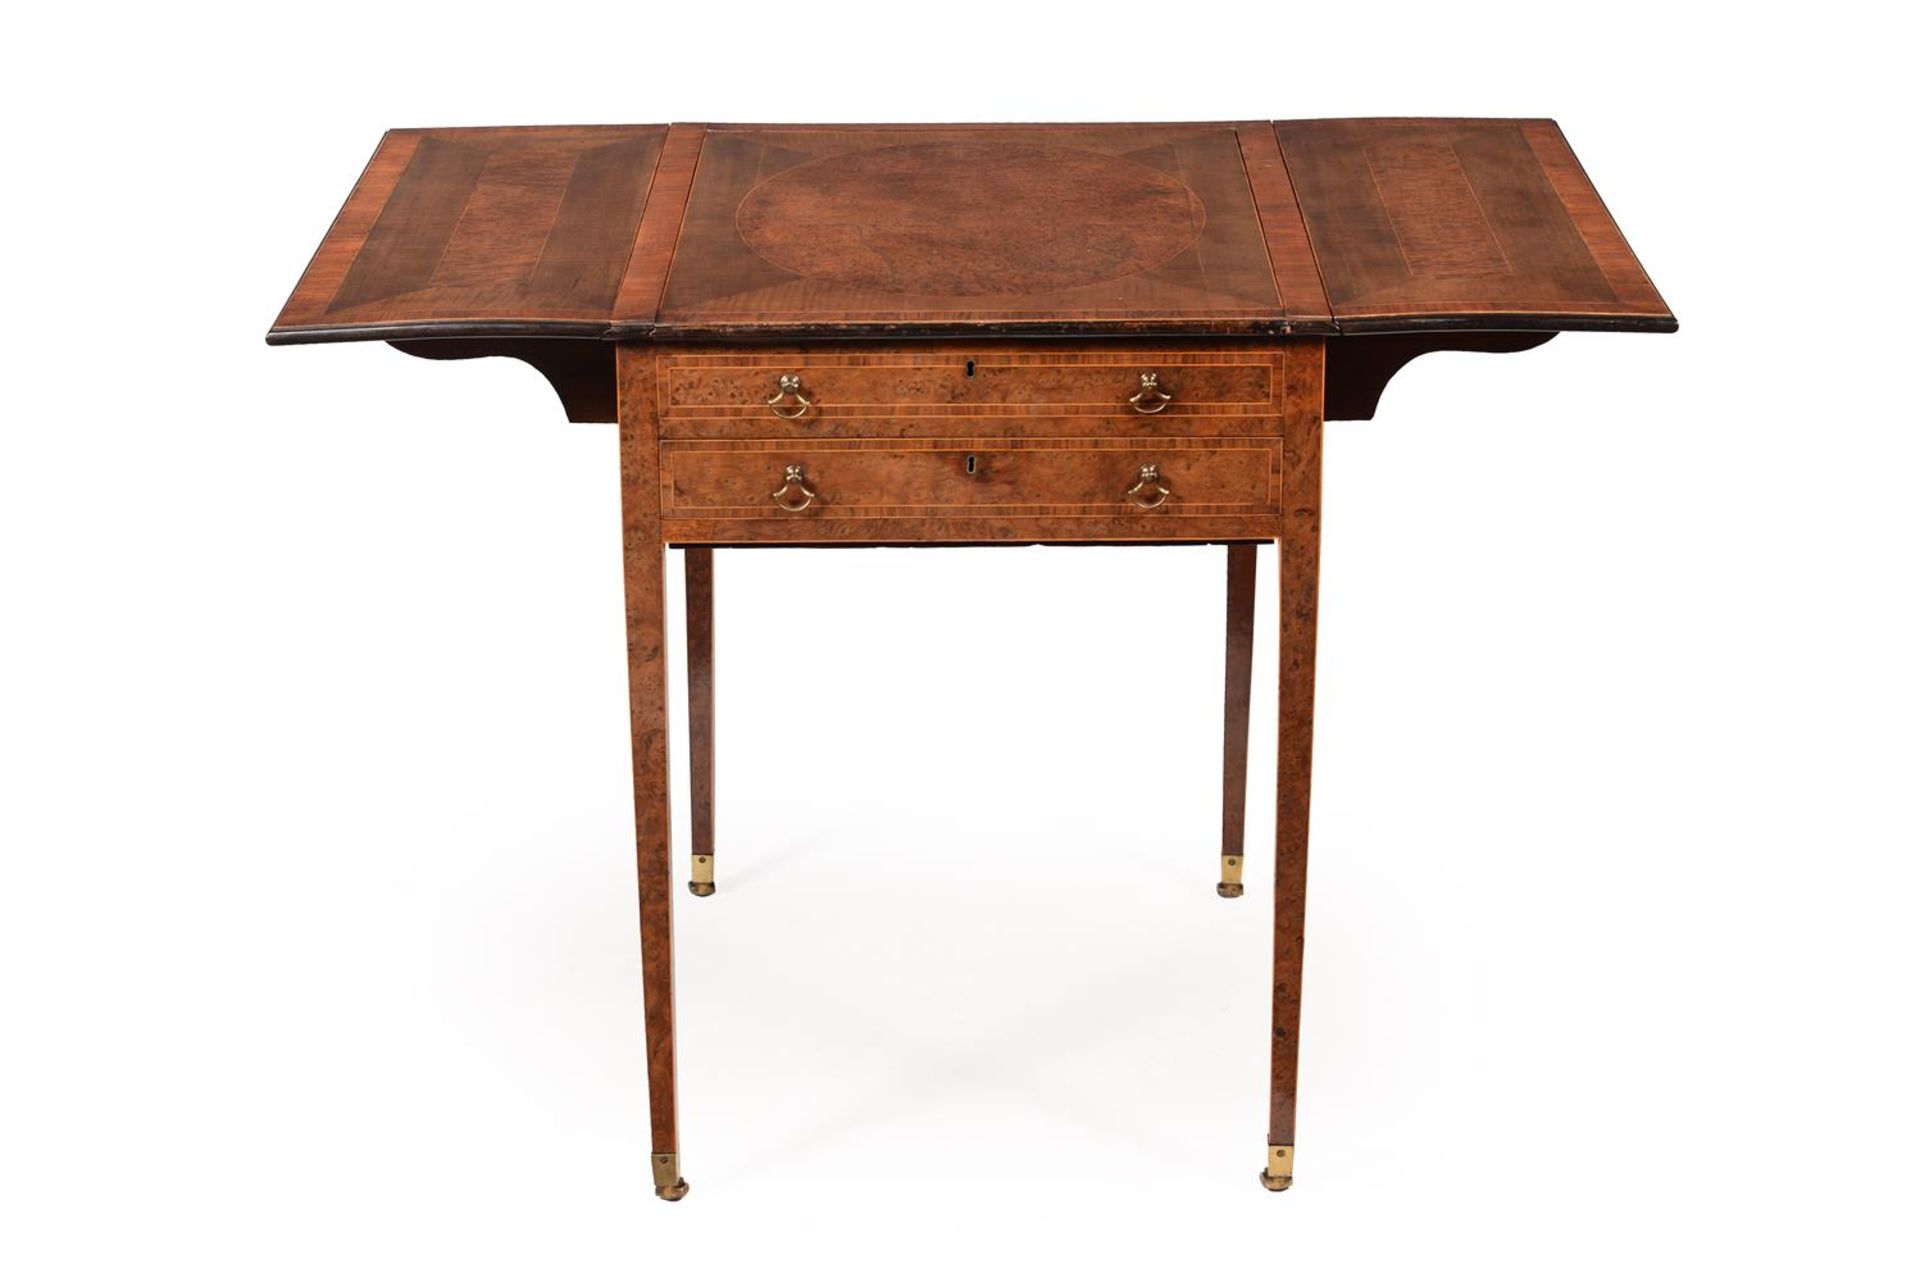 Y A GEORGE III BURR YEW AND HAREWOOD 'HARLEQUIN' PEMBROKE TABLE, ATTRIBUTED TO INCE & MAYHEW - Bild 5 aus 6